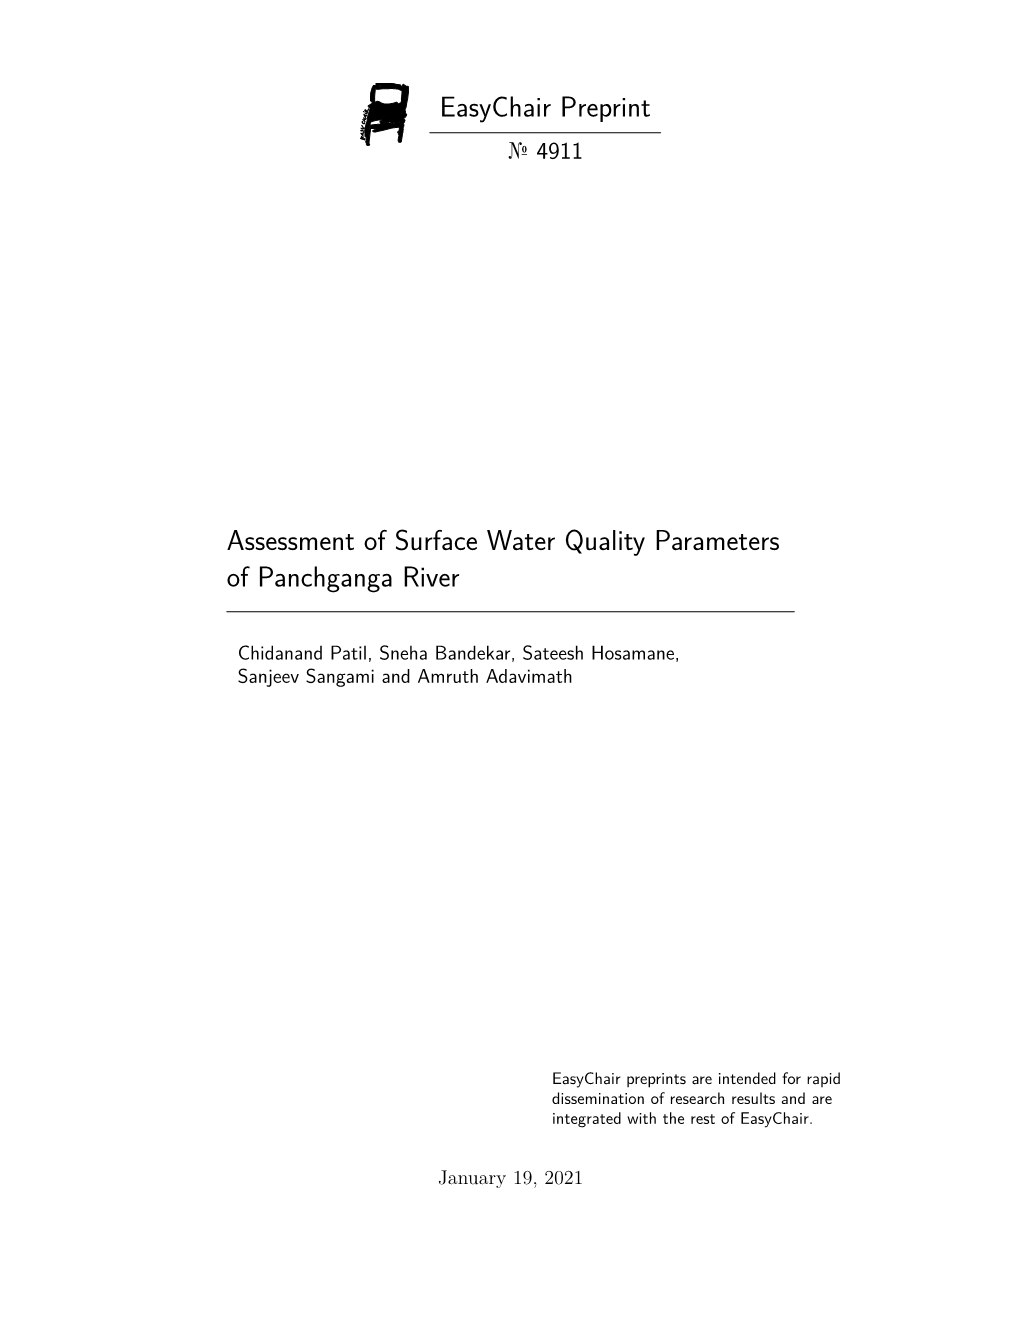 Assessment of Surface Water Quality Parameters of Panchganga River